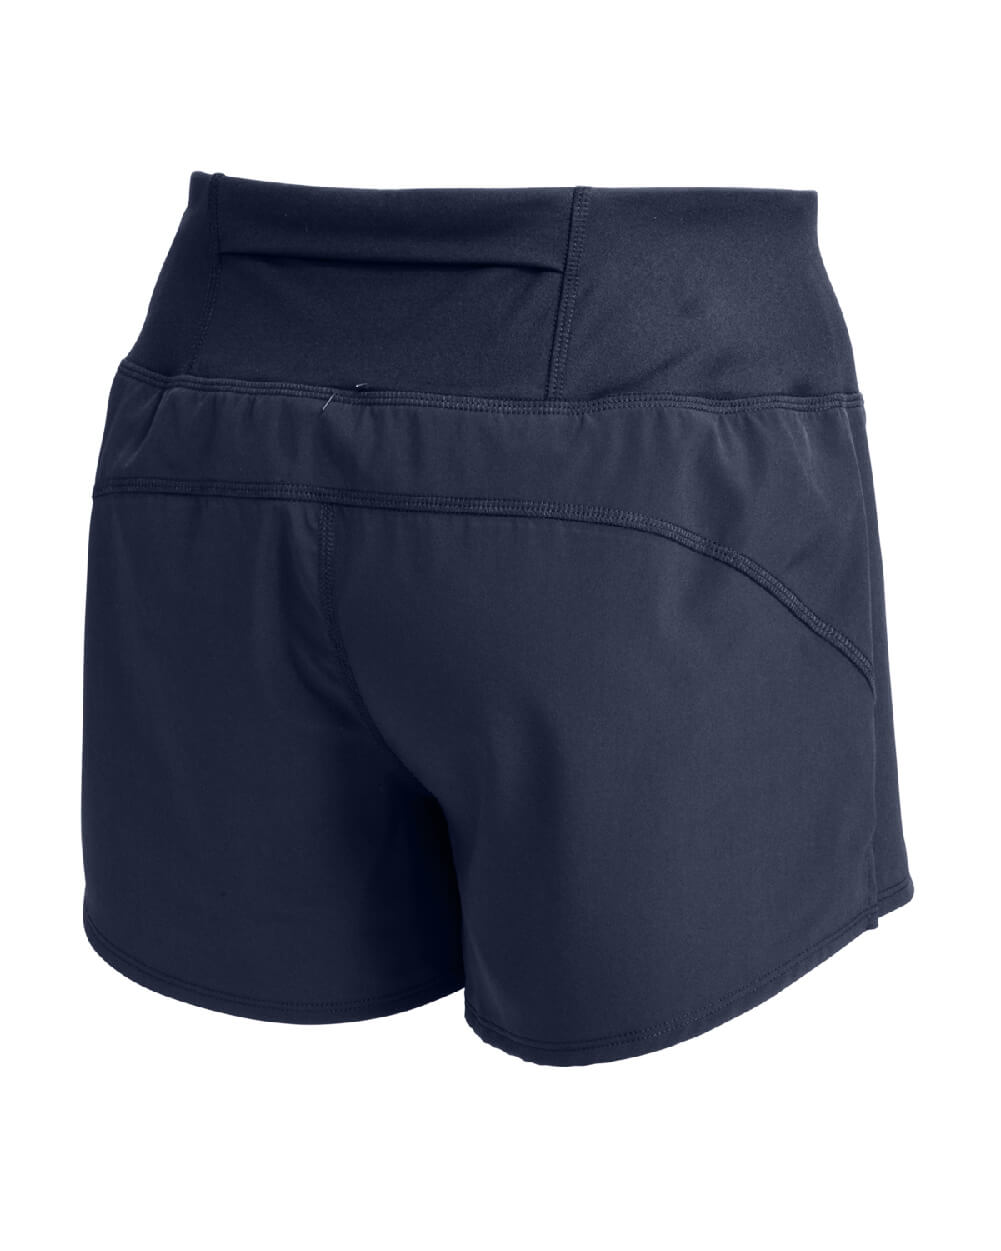 Women's Navy Evolution Performance Shorts (Back) by Odisi Apparel